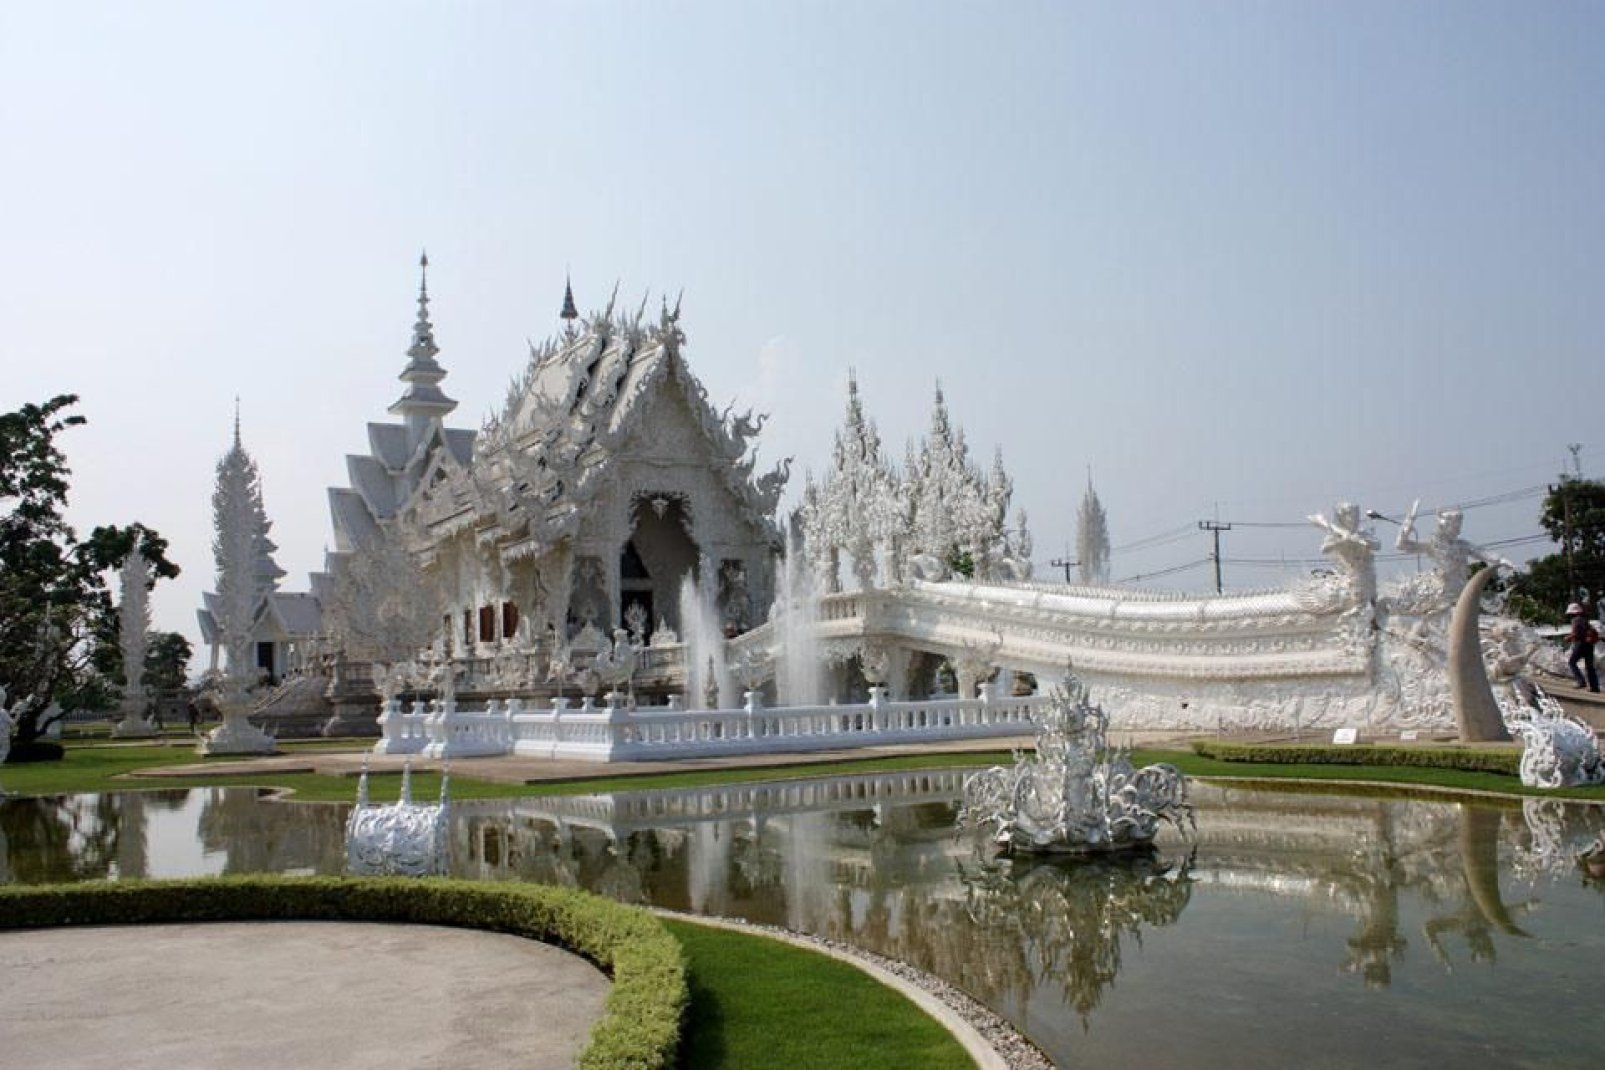 This temple, also known as the 'White Temple', stands some 8 miles south of Chiang Rai.